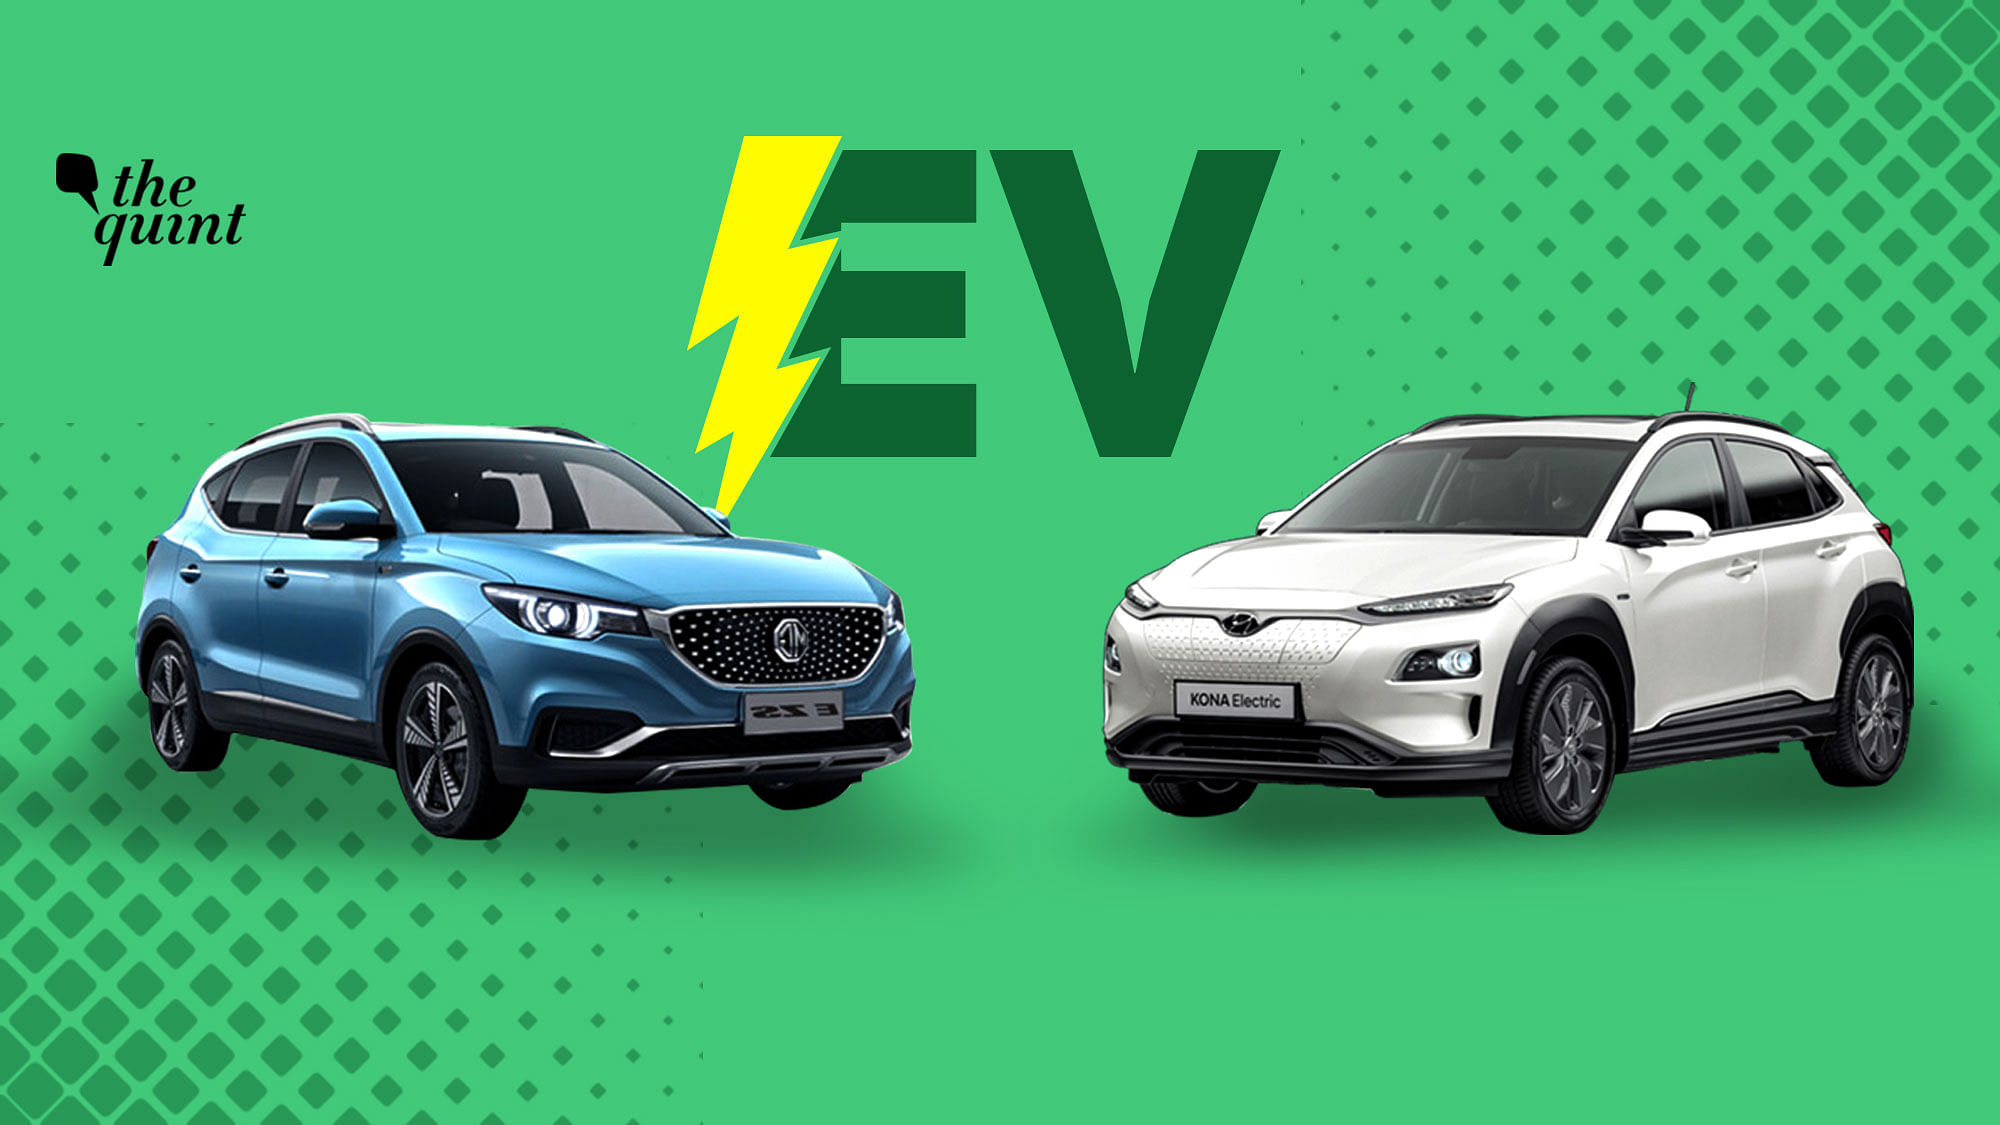 Both these companies are vying for the elusive lead in the nascent EV market in India.